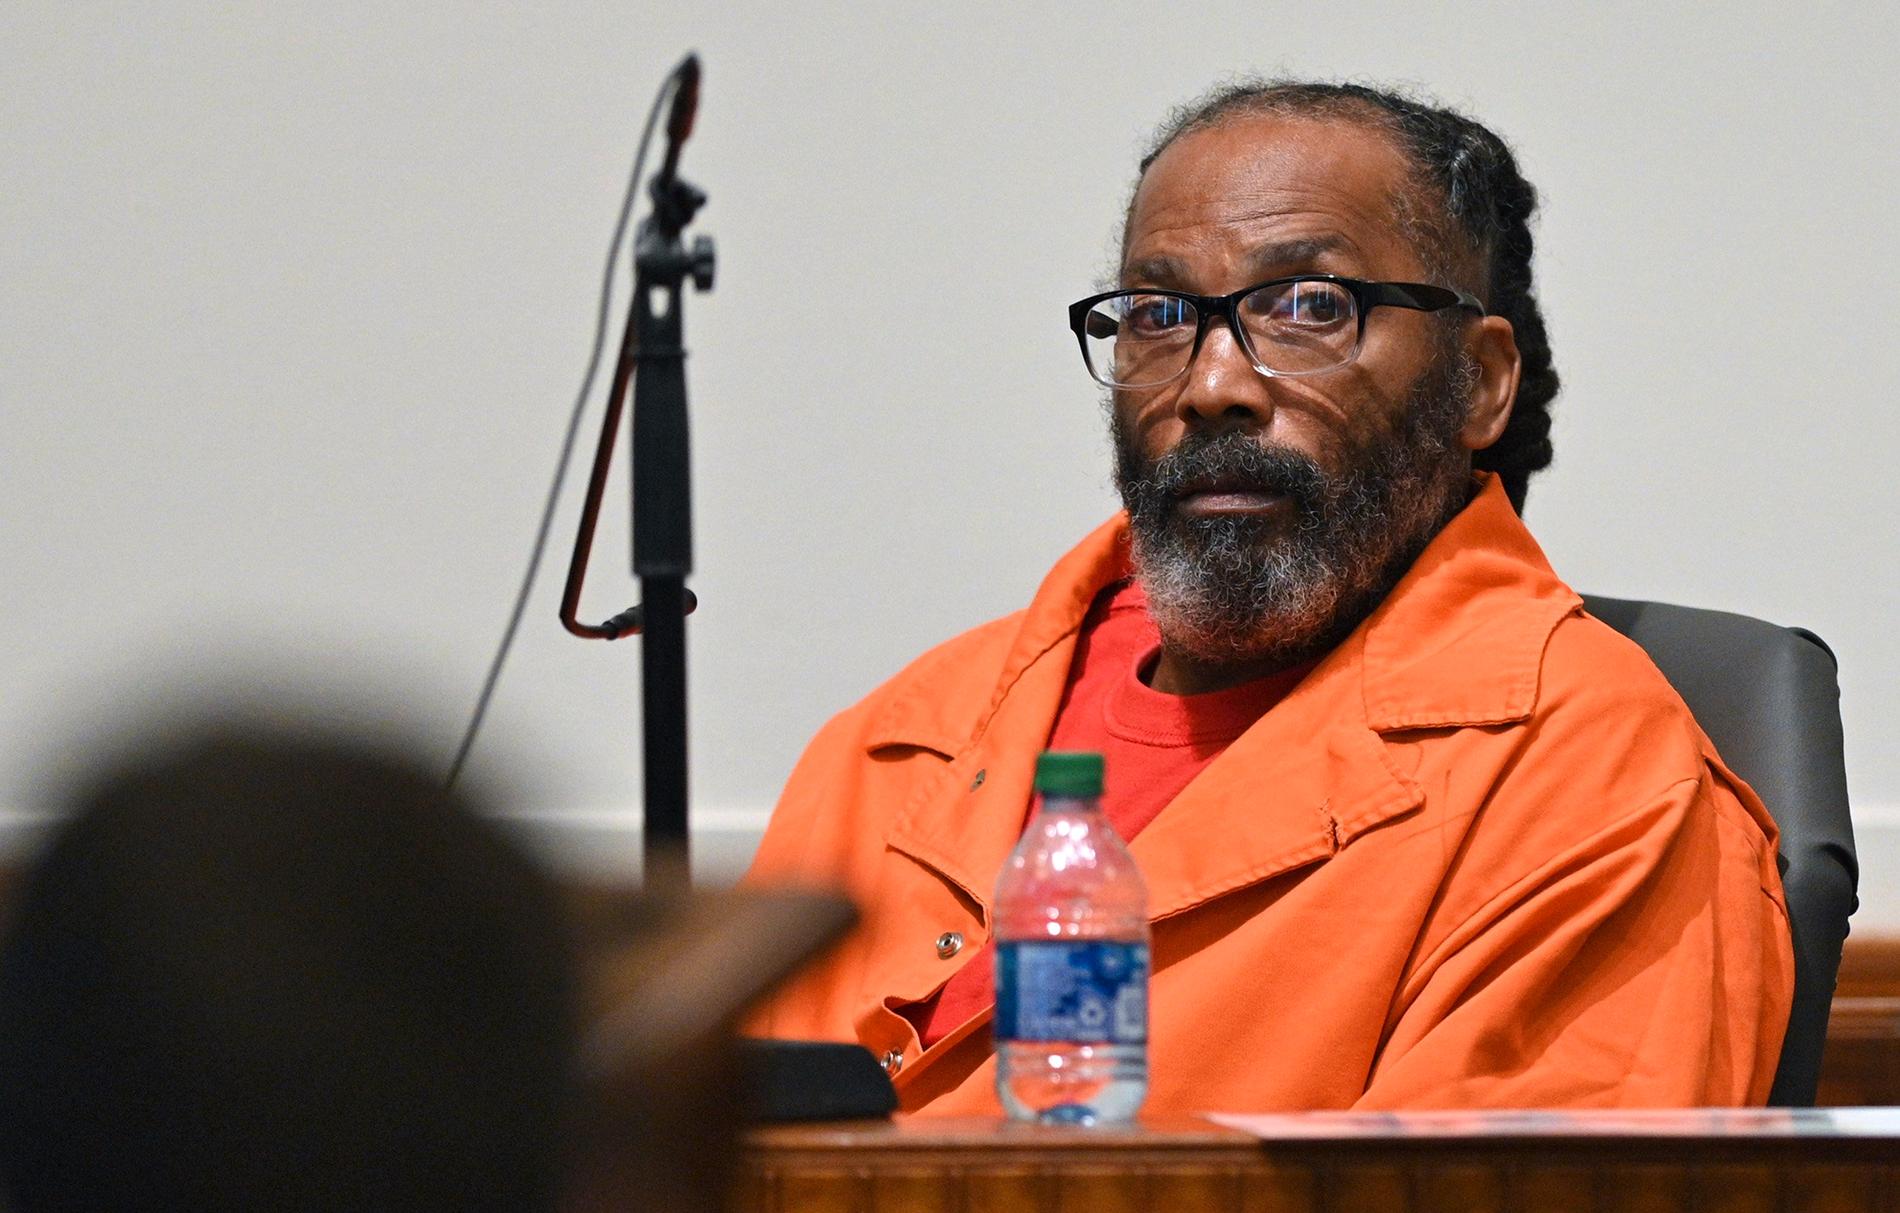 Man acquitted after more than 40 years in prison in the United States - VG